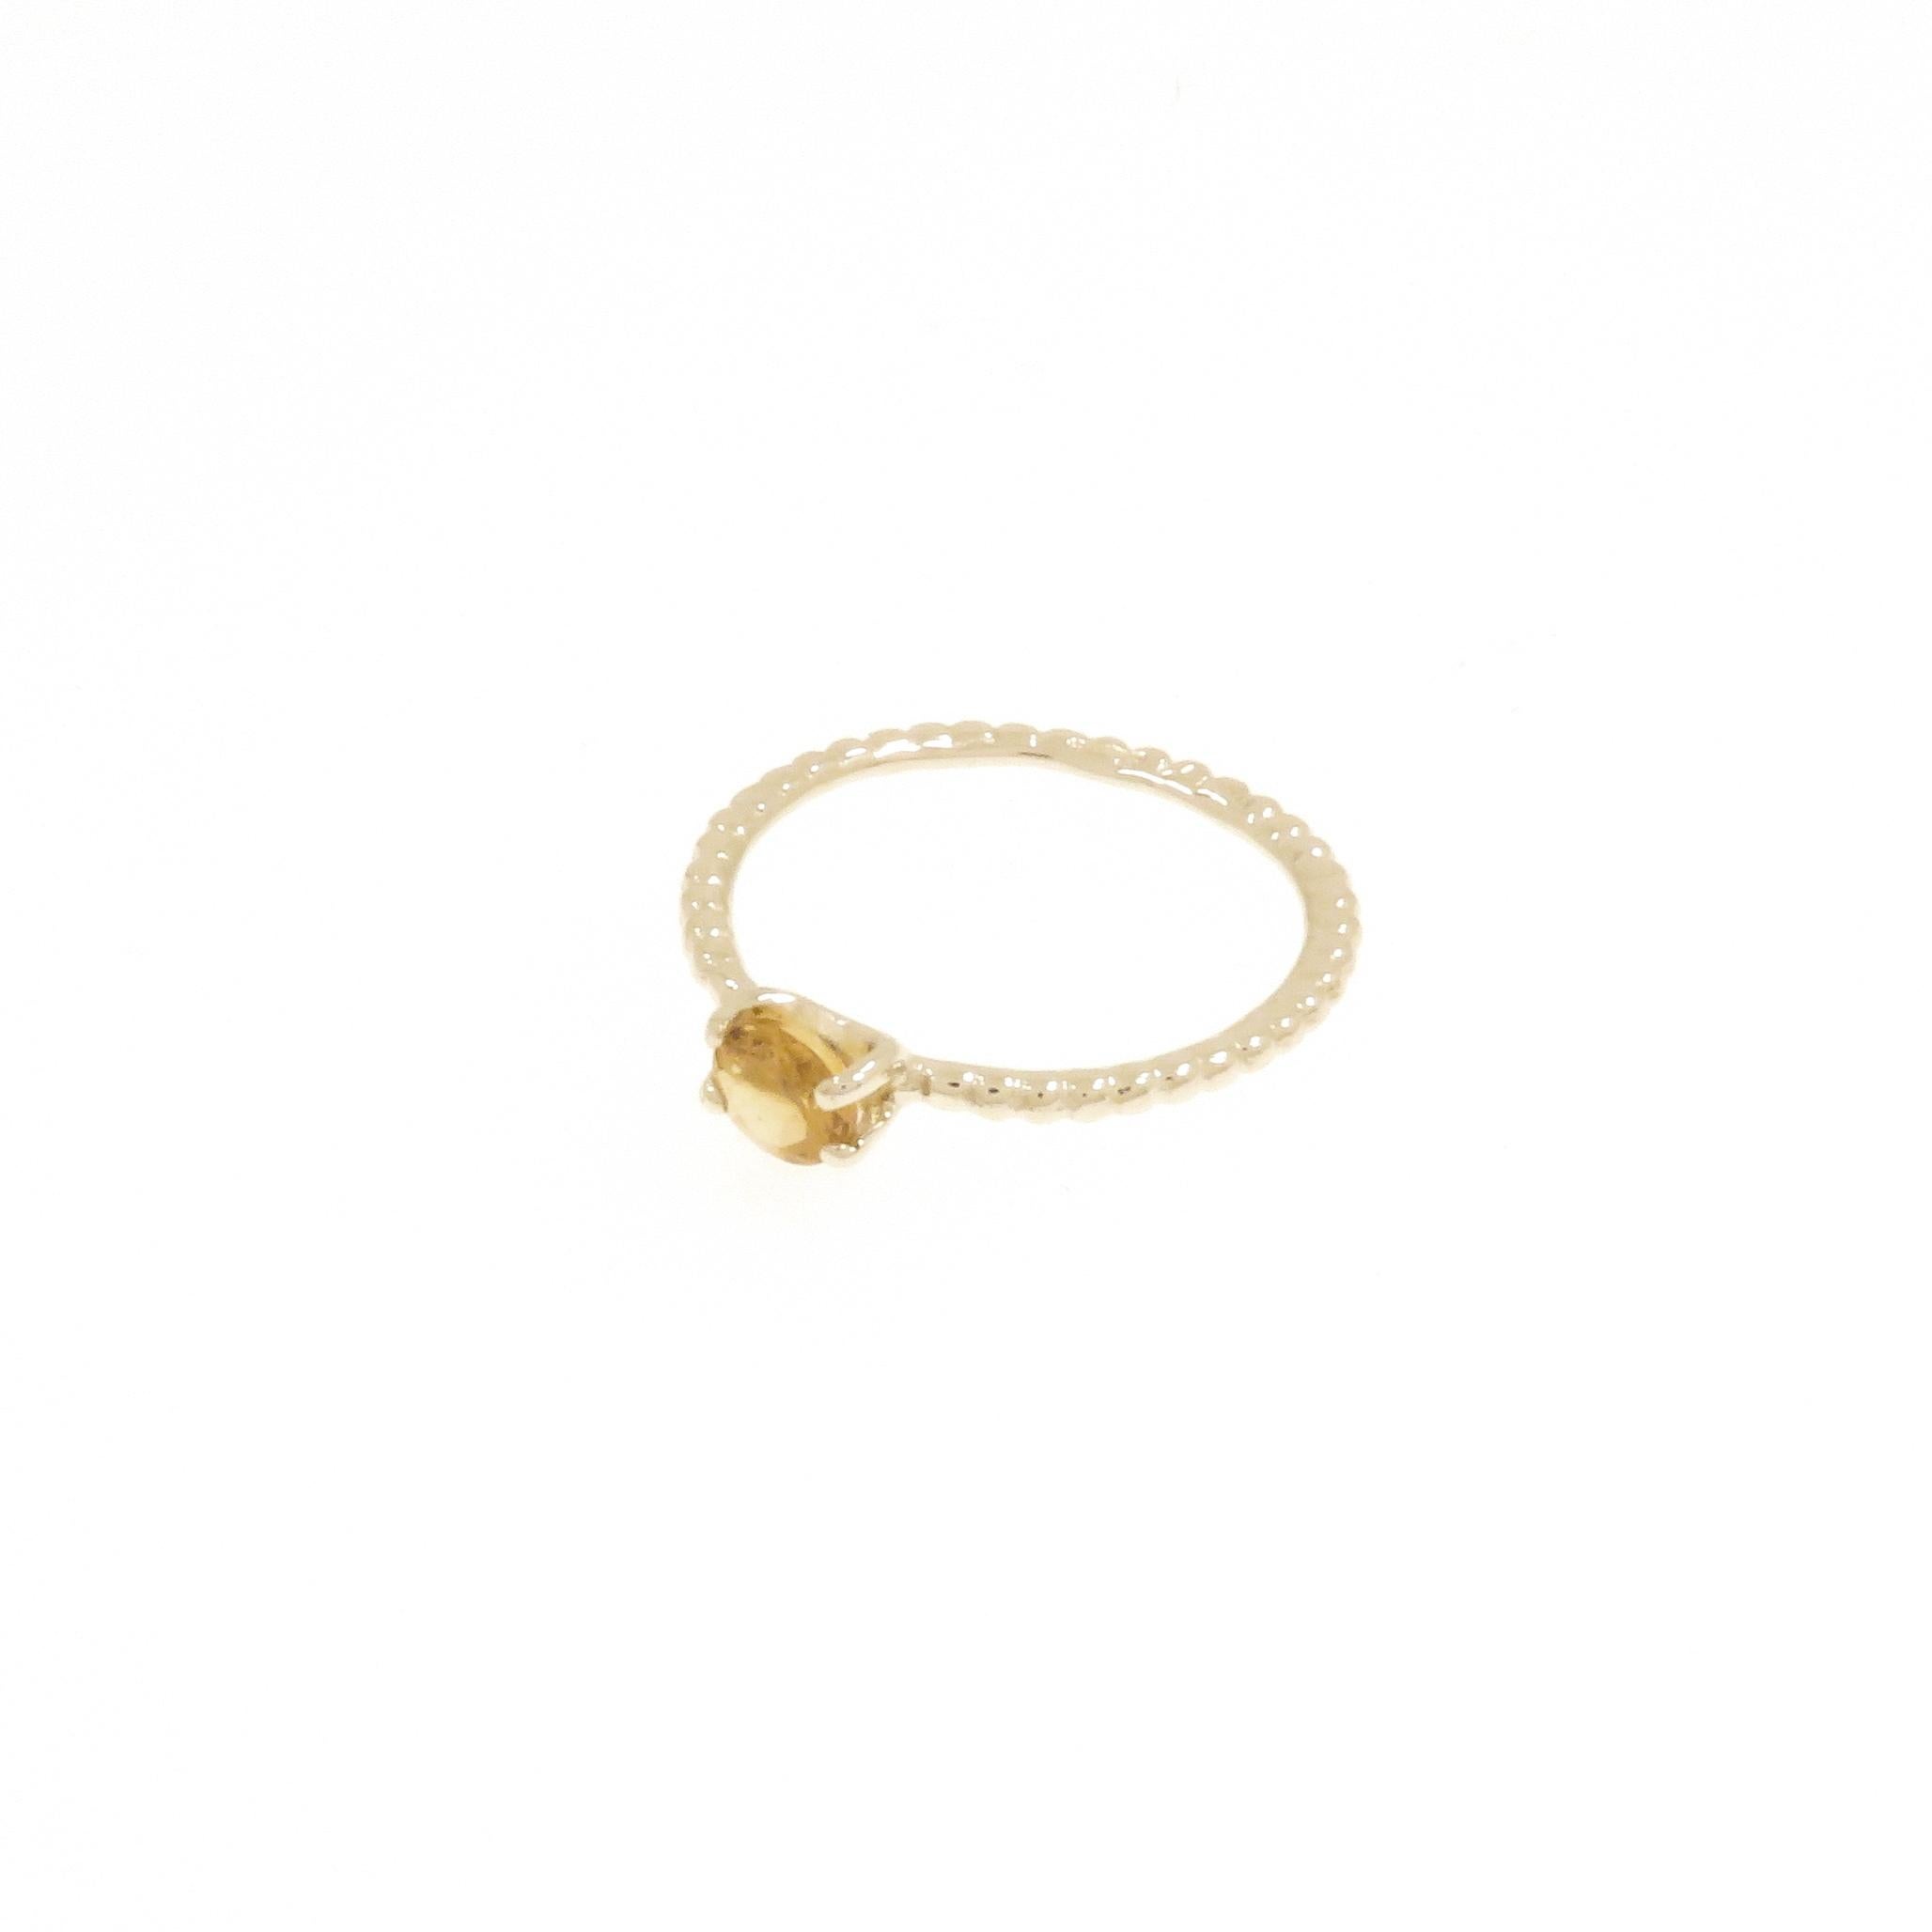 Citrine Withe Gold Stacking Ring Handcrafted in Italy by Botta Gioielli For Sale 1